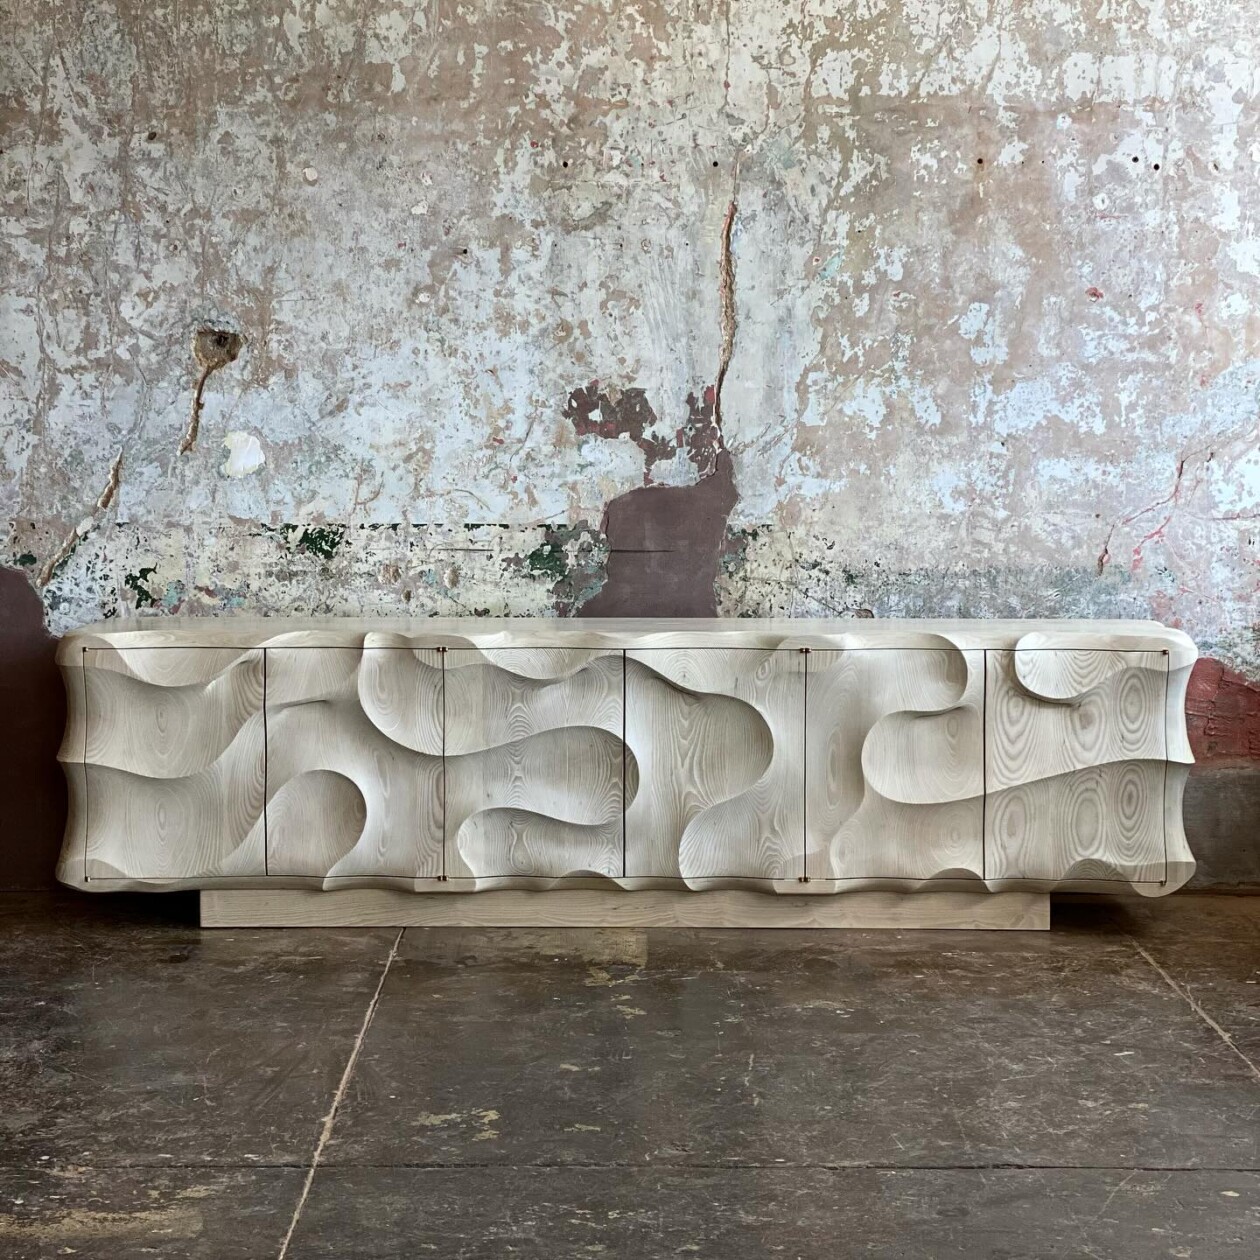 Intricately Engraved And Textured Organic Shaped Furniture By Caleb Woodard (16)